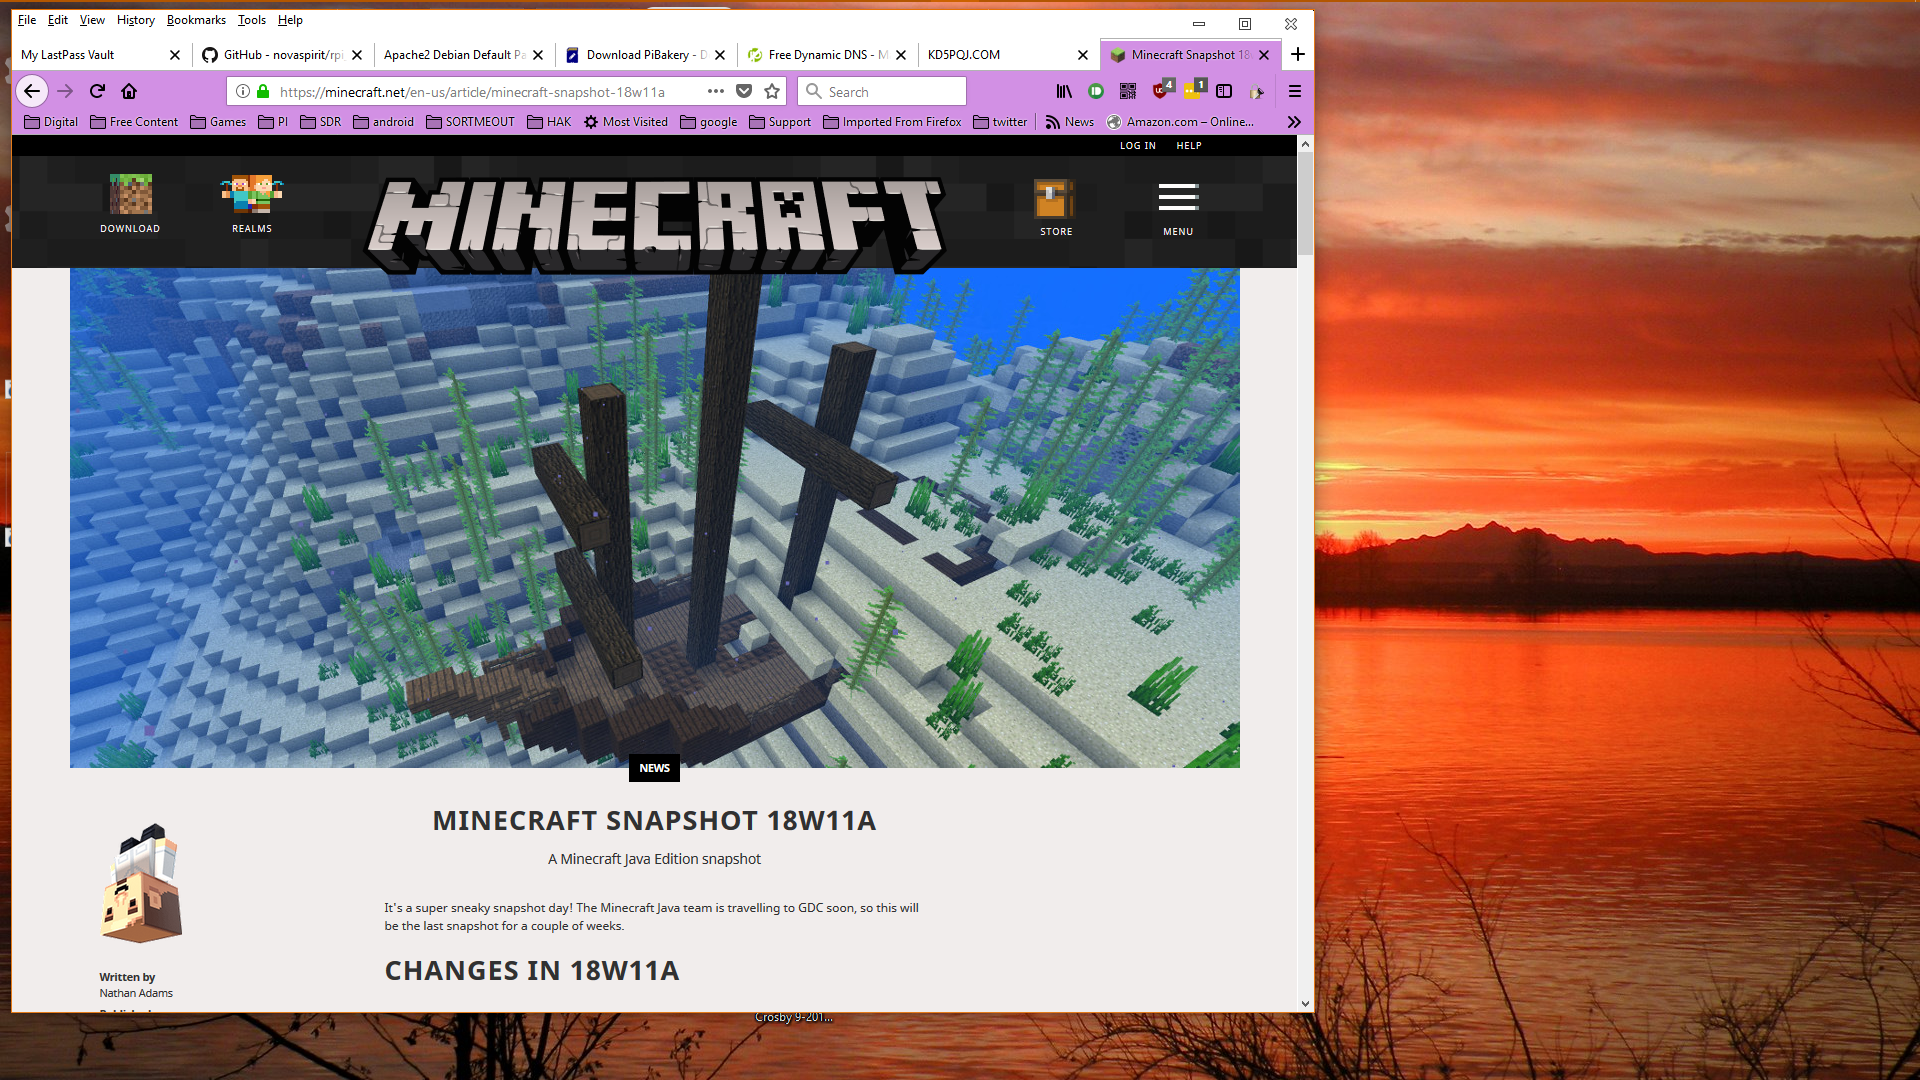 Image of minecraft.net Snapshot 18w11A page